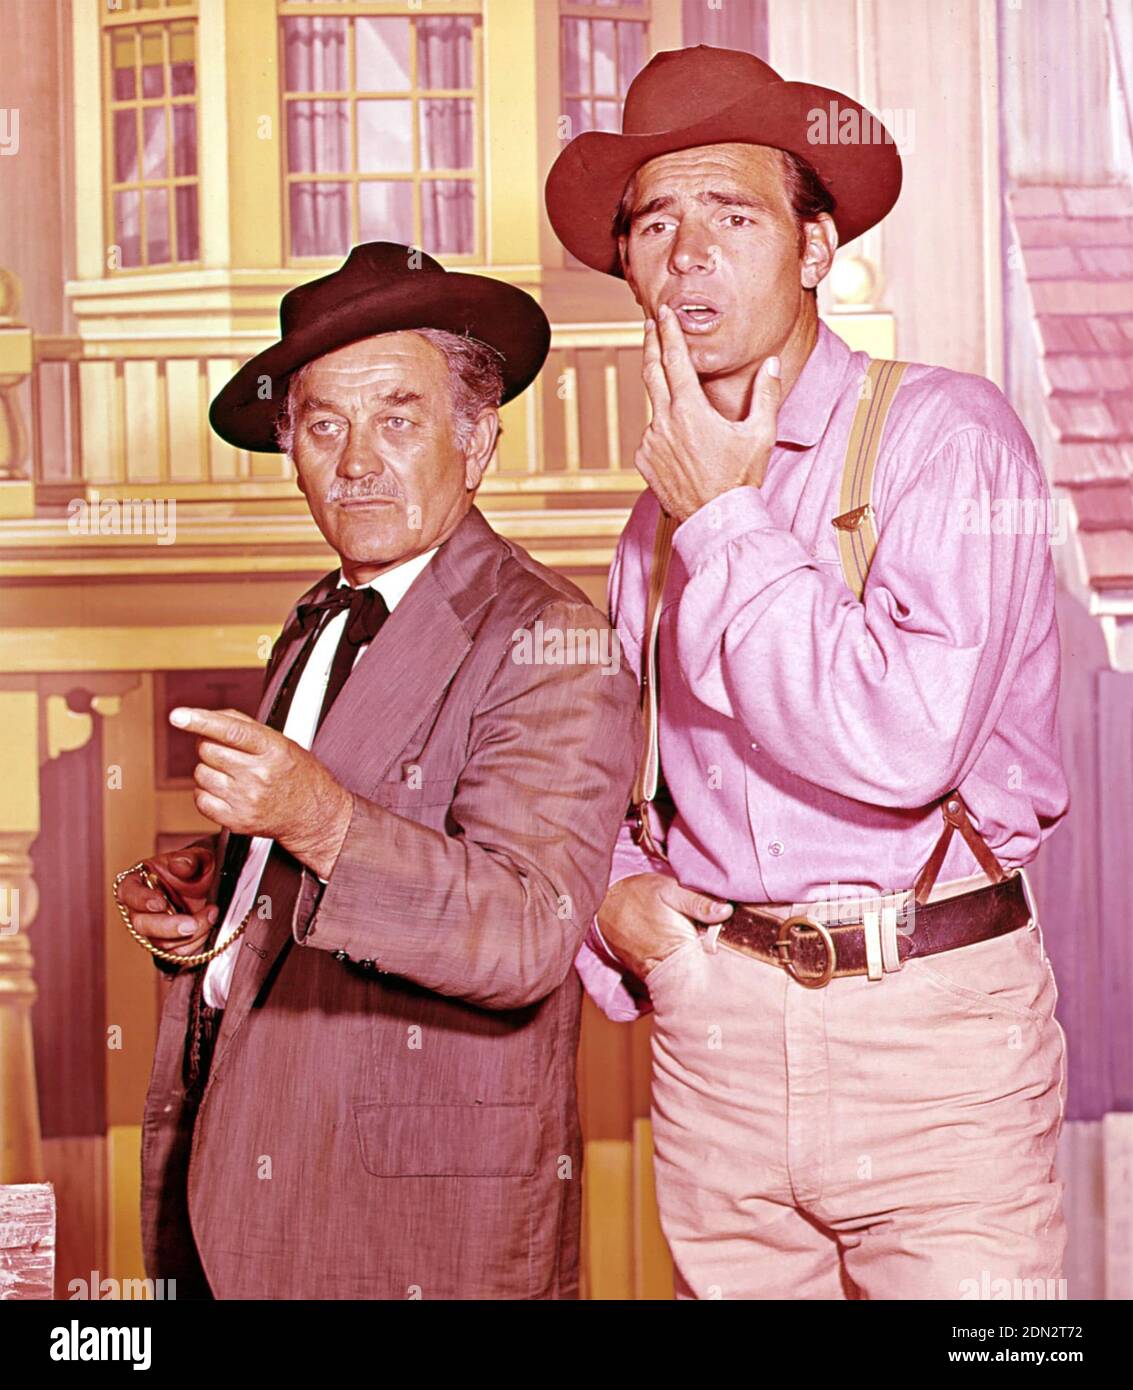 GUNSMOKE CBS TV series 1955-1975 with Dennis Weaver at right as Chester Goode and Milburn Stone as Dr. Galen Adams  about 1967 Stock Photo